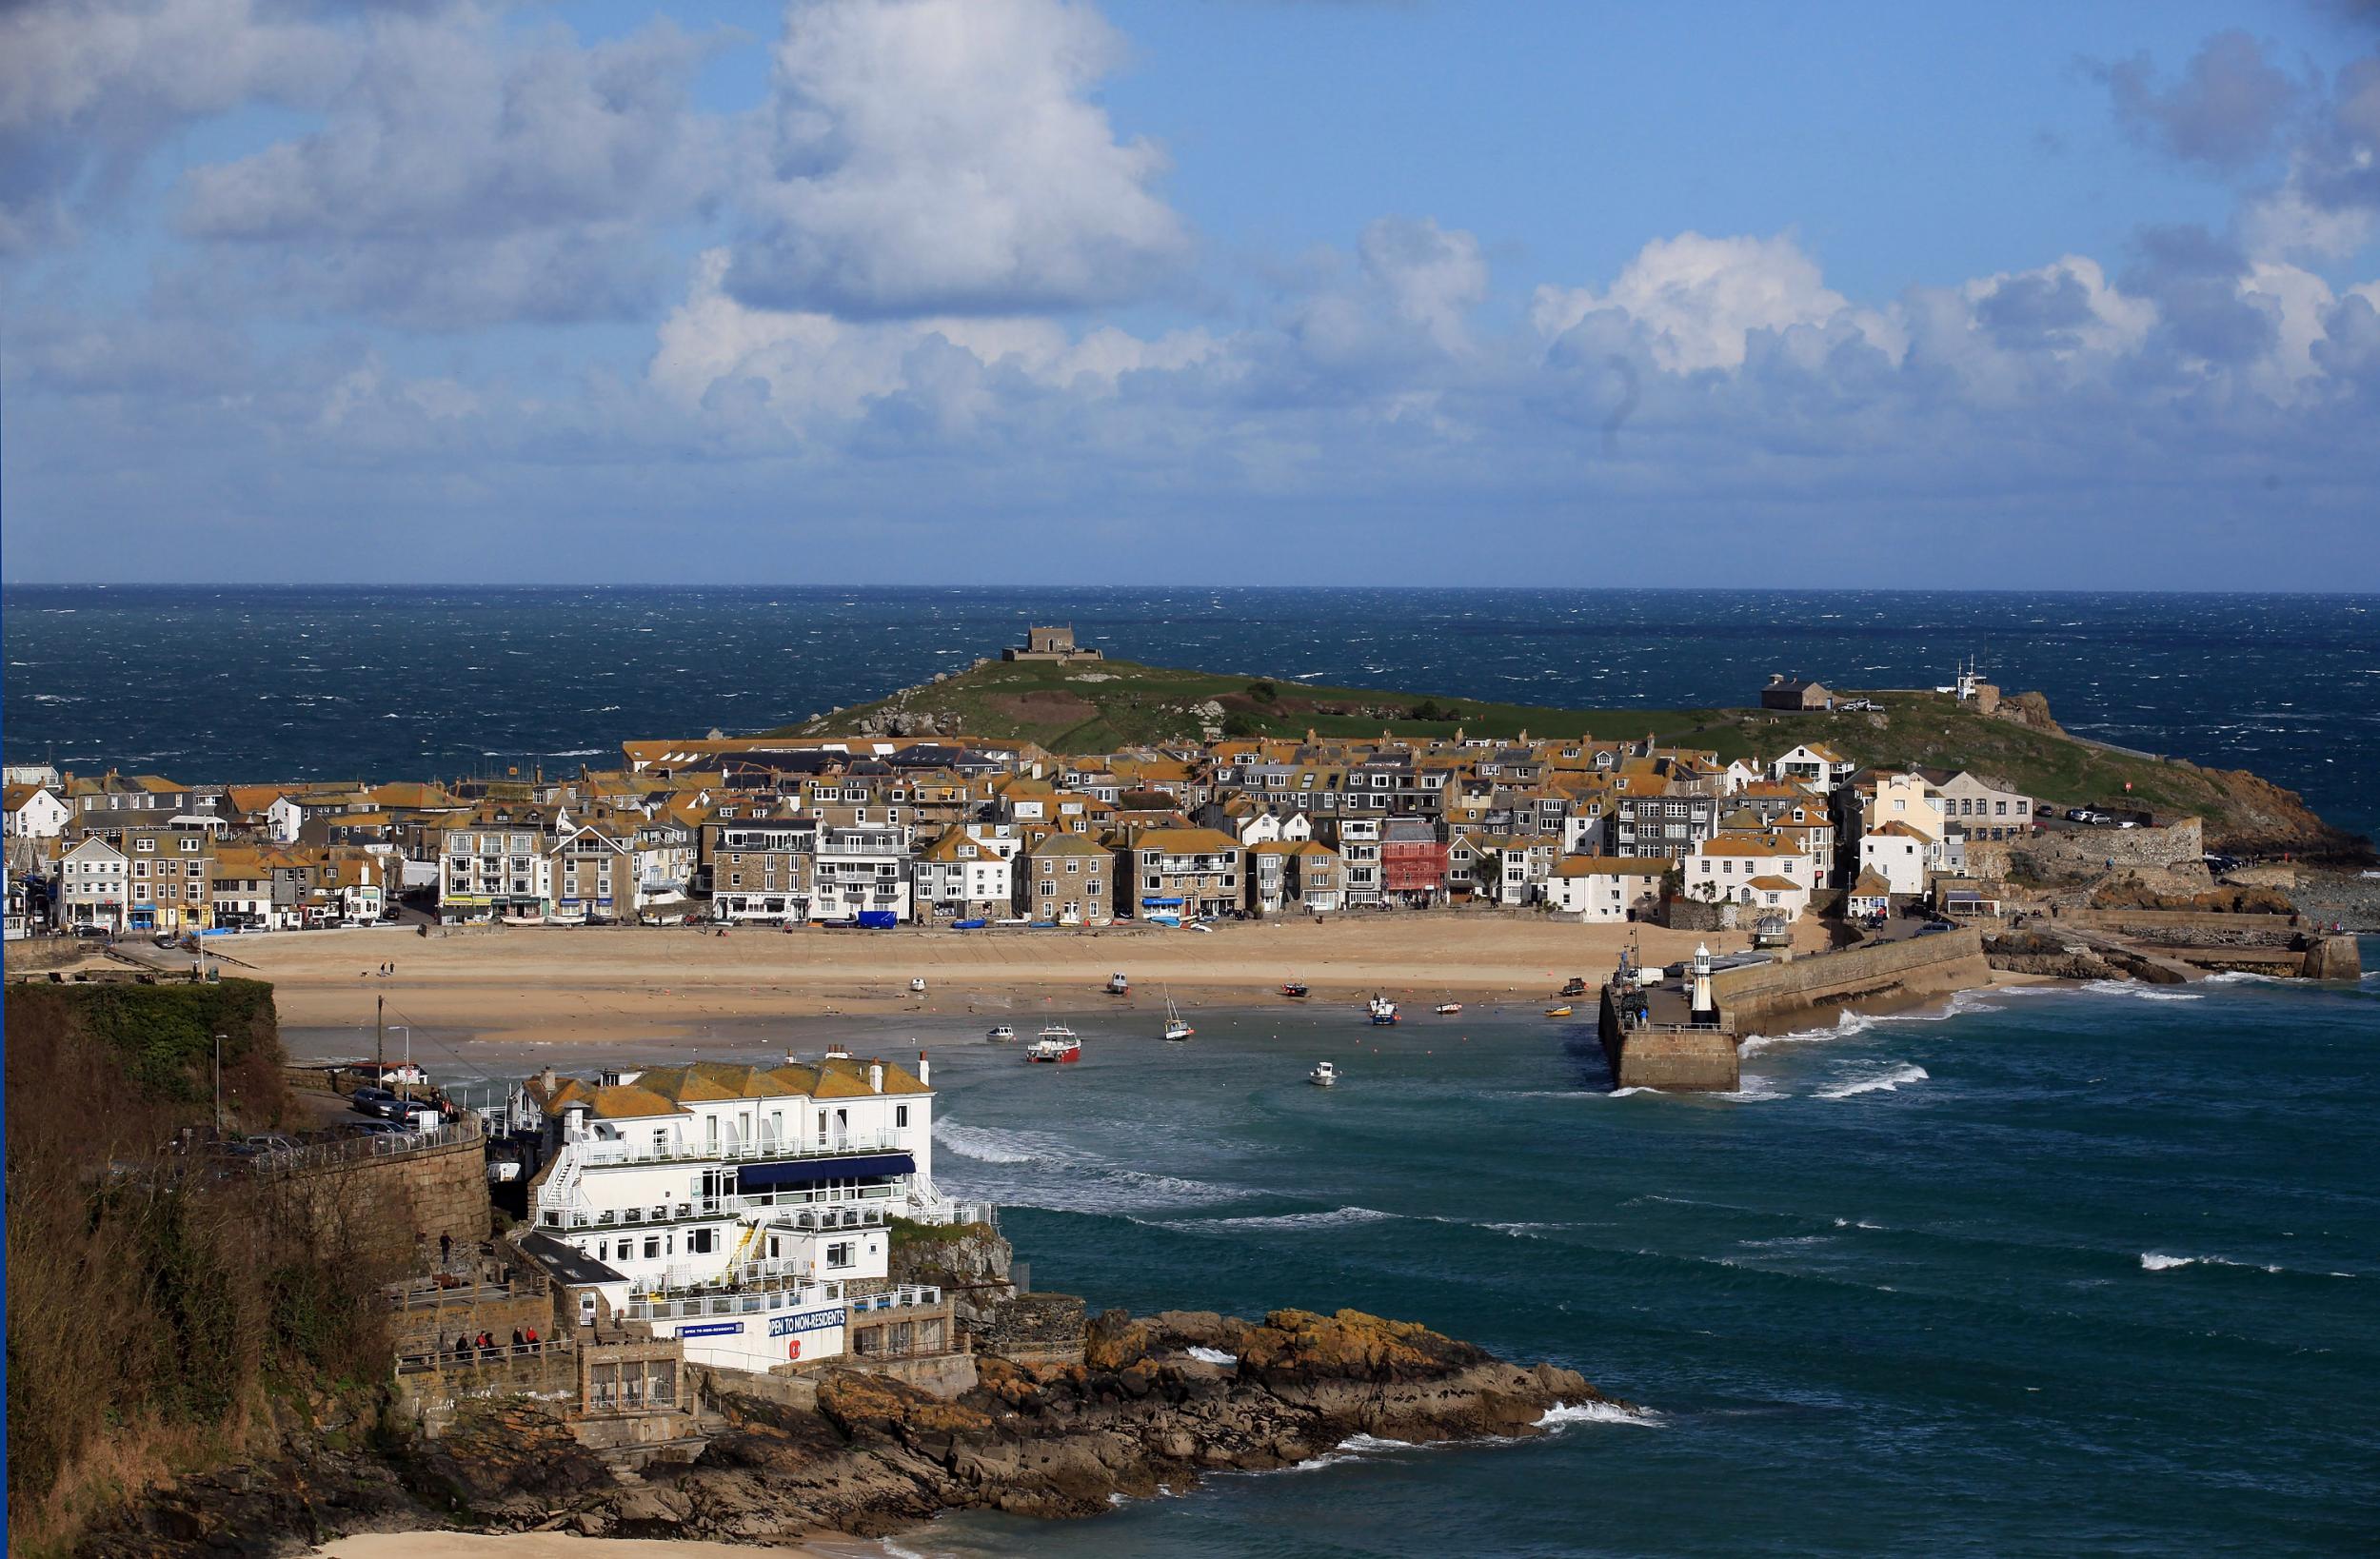 The rail line to St Ives in 1877 caused a huge surge in tourism to the area